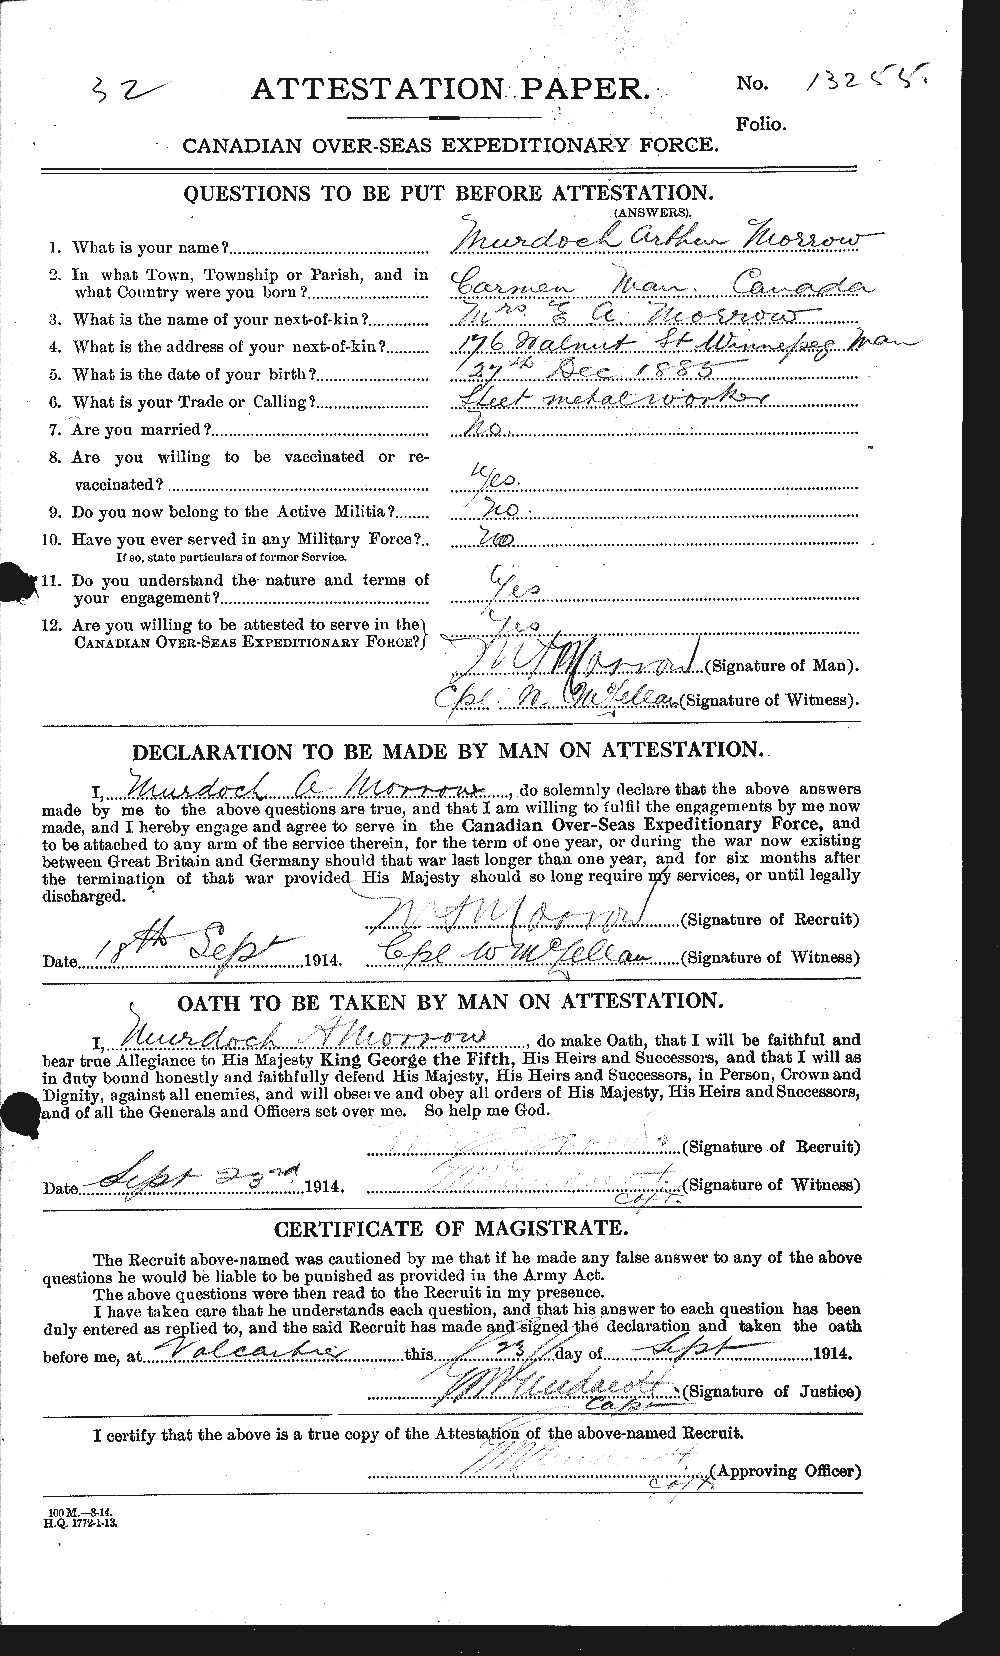 Personnel Records of the First World War - CEF 504295a